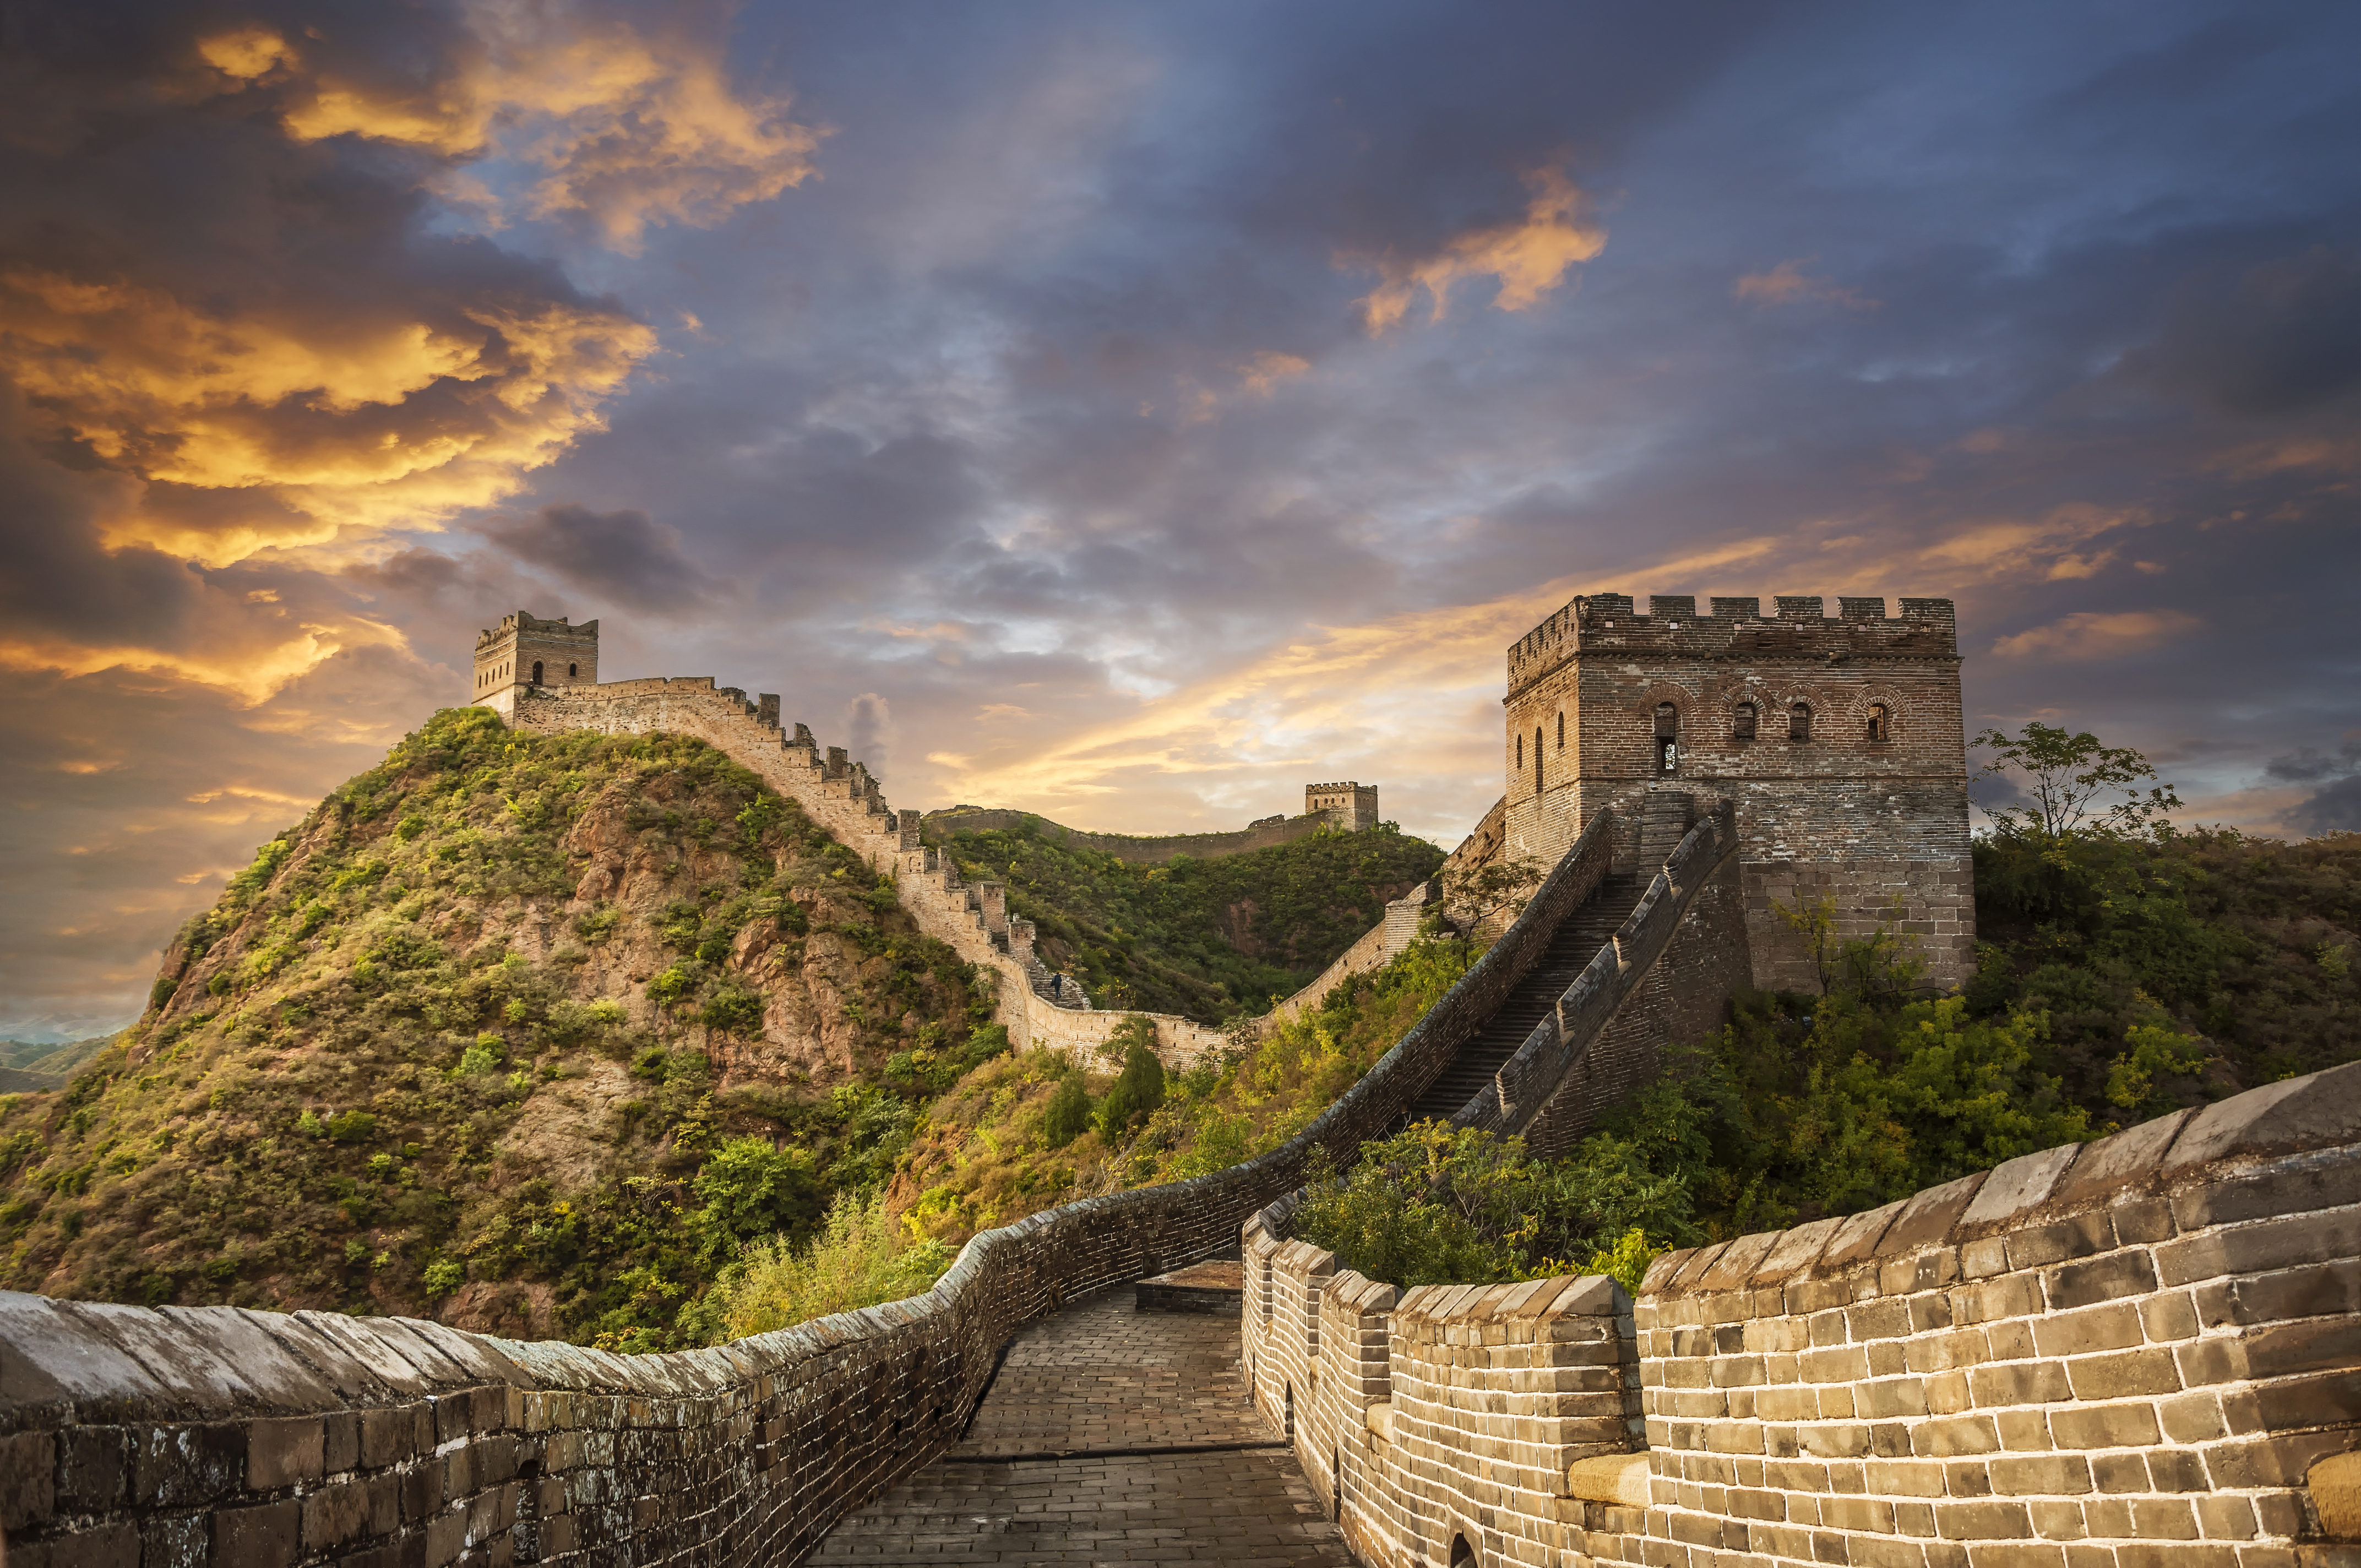 The world-renowned Great Wall stretches more than 13,000 miles